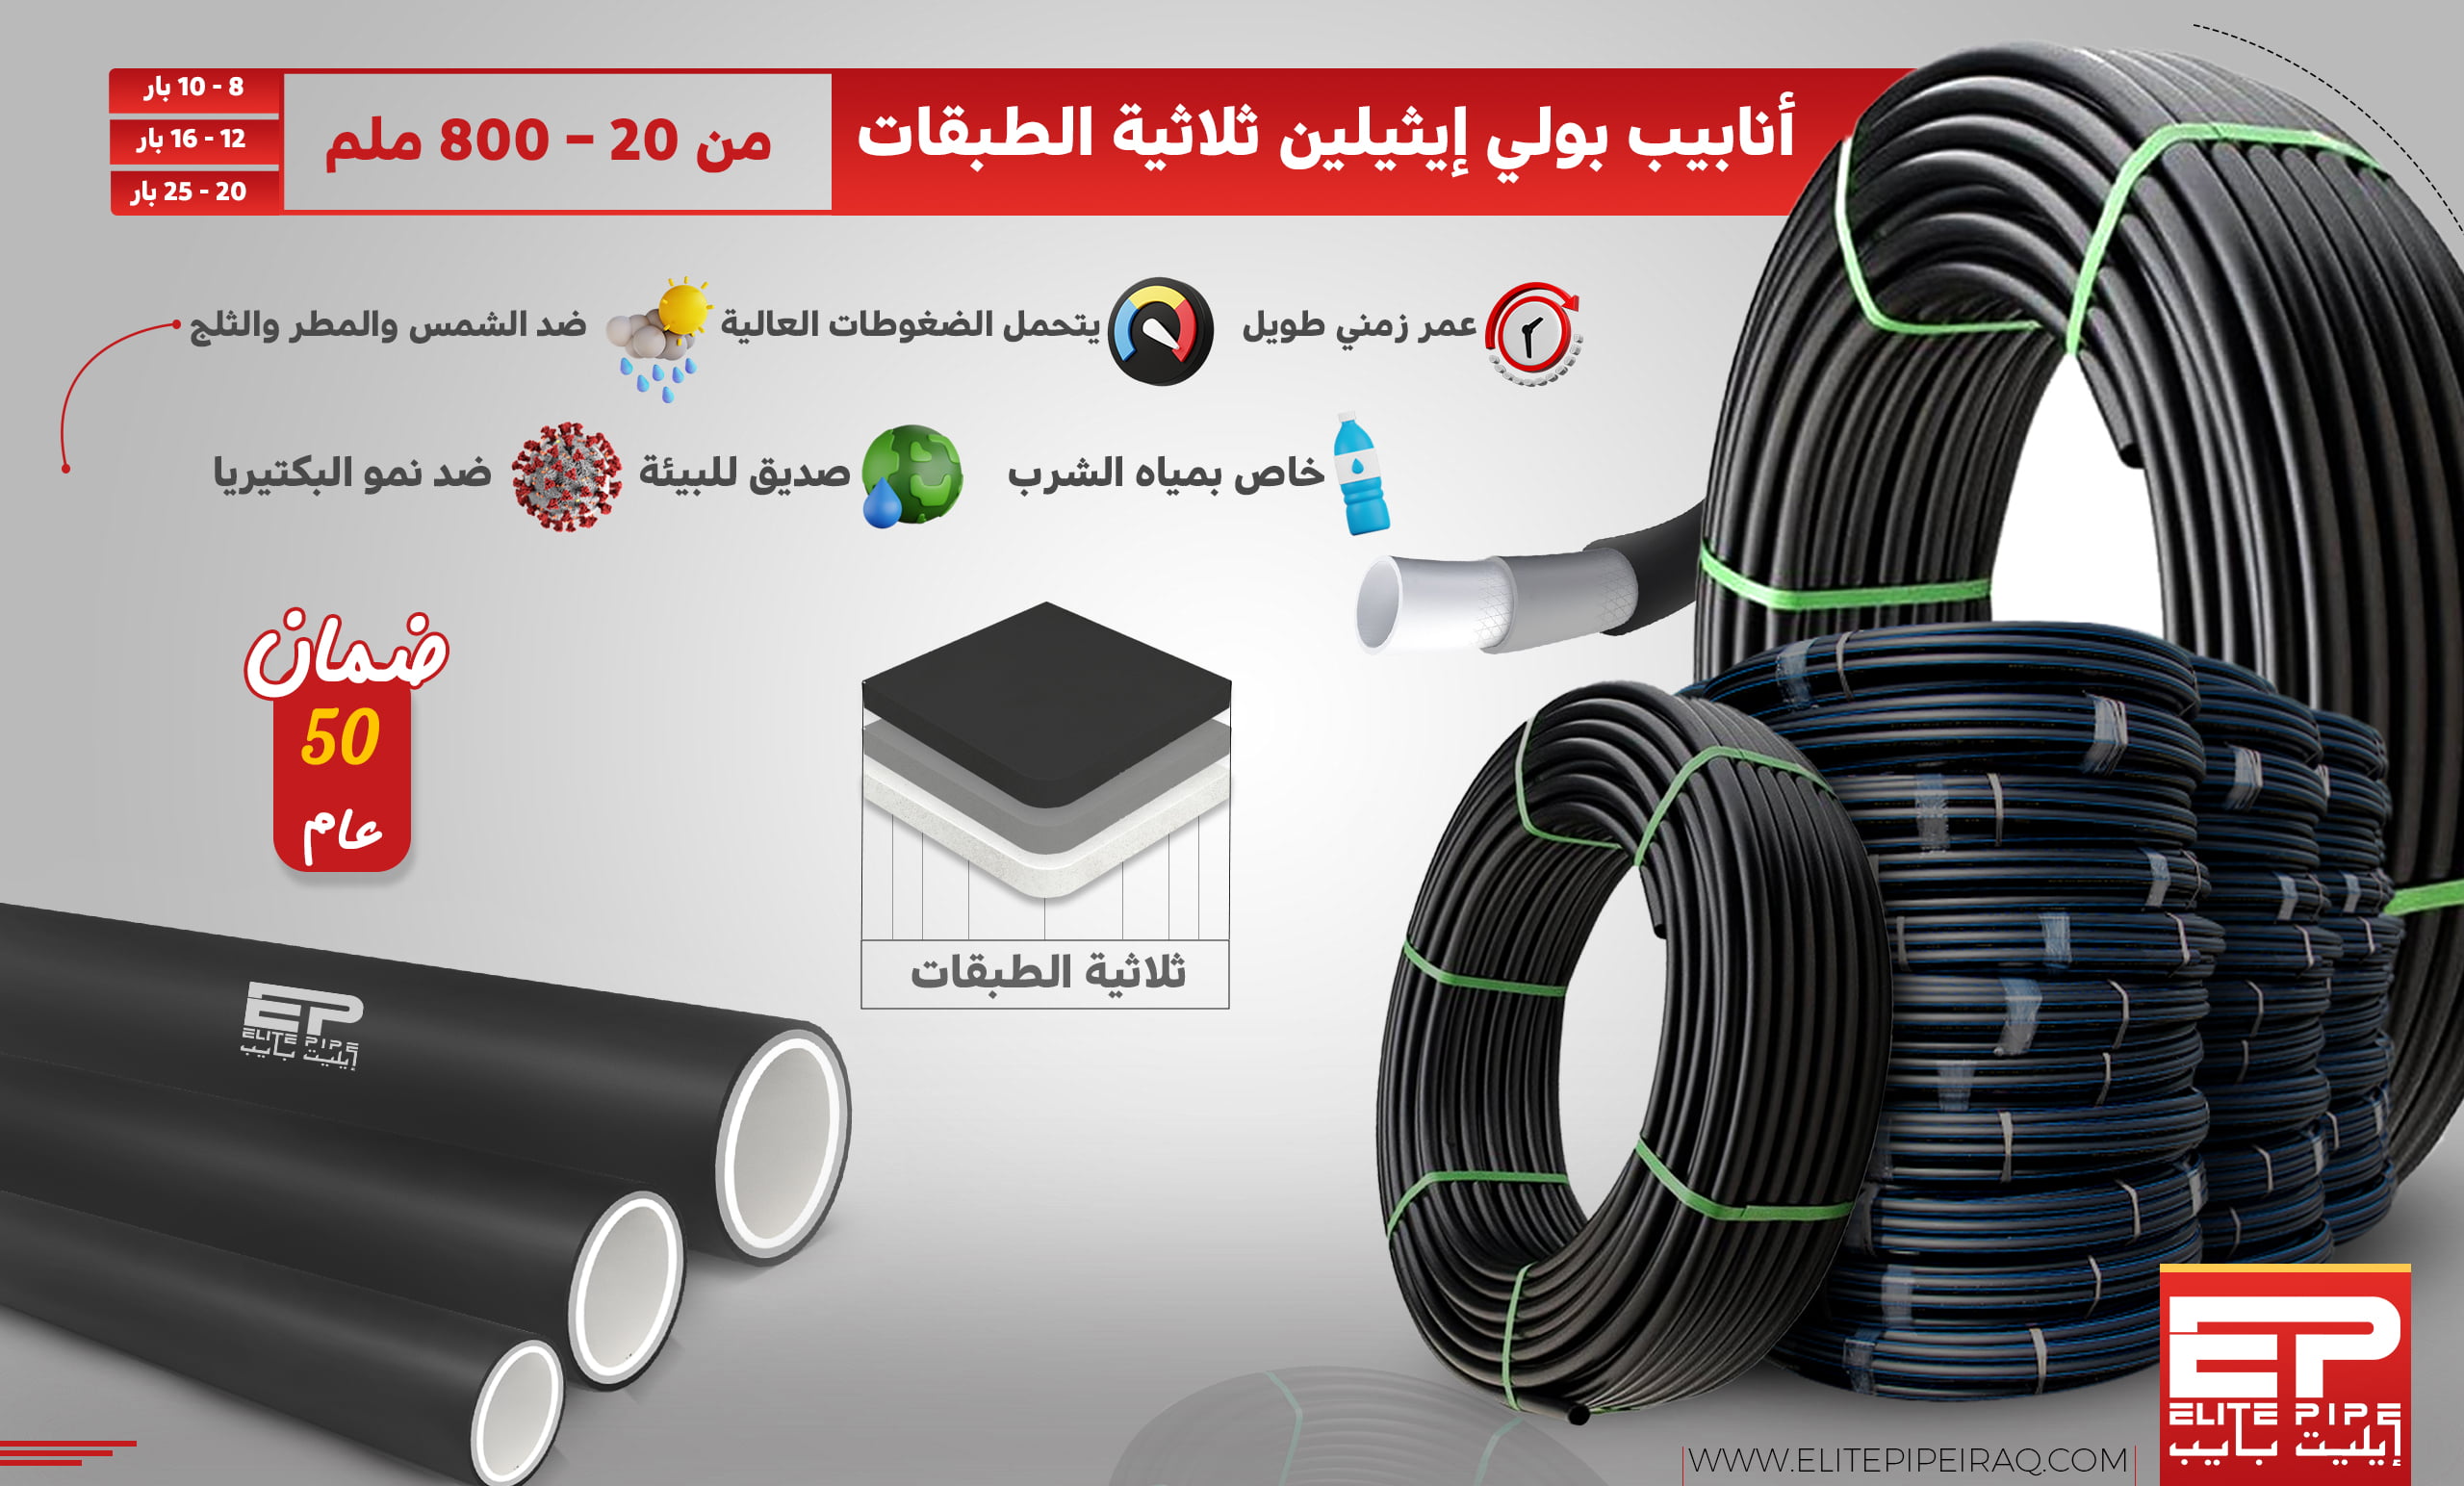 What are the raw materials for polyethylene pipes? HDPE, PE80 and PE100